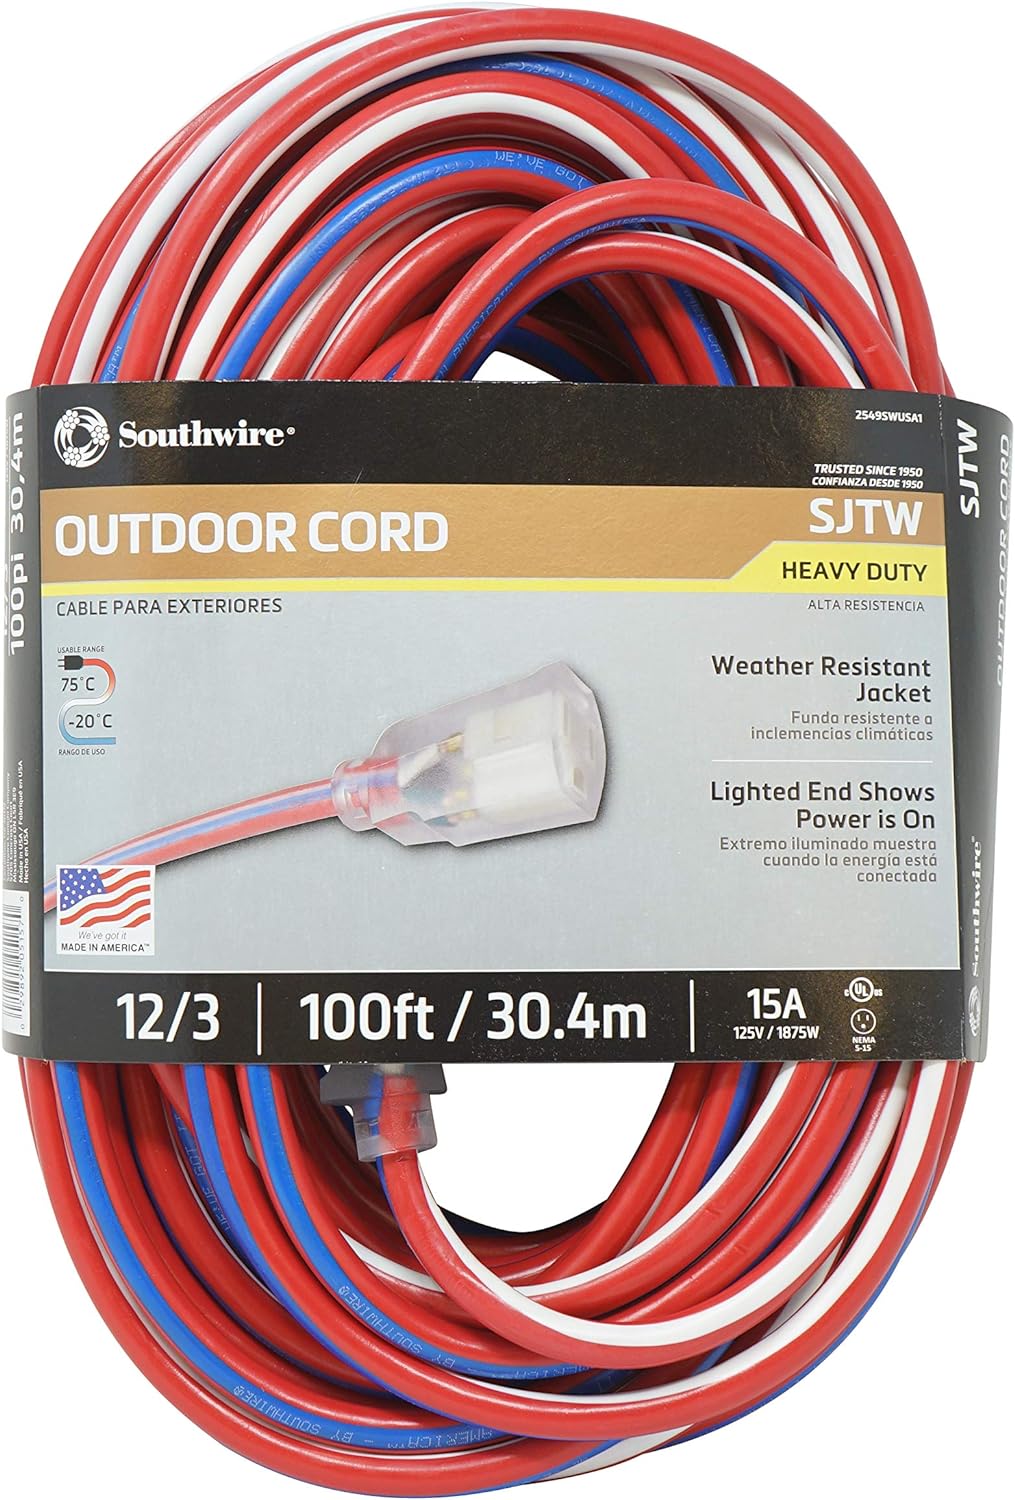 SOUTHWIRE 2549SWUSA1 100-Feet, Contractor Grade, 12/3 Extension Cord, With Lighted End; Red White And Blue, American Made Extension Cord,